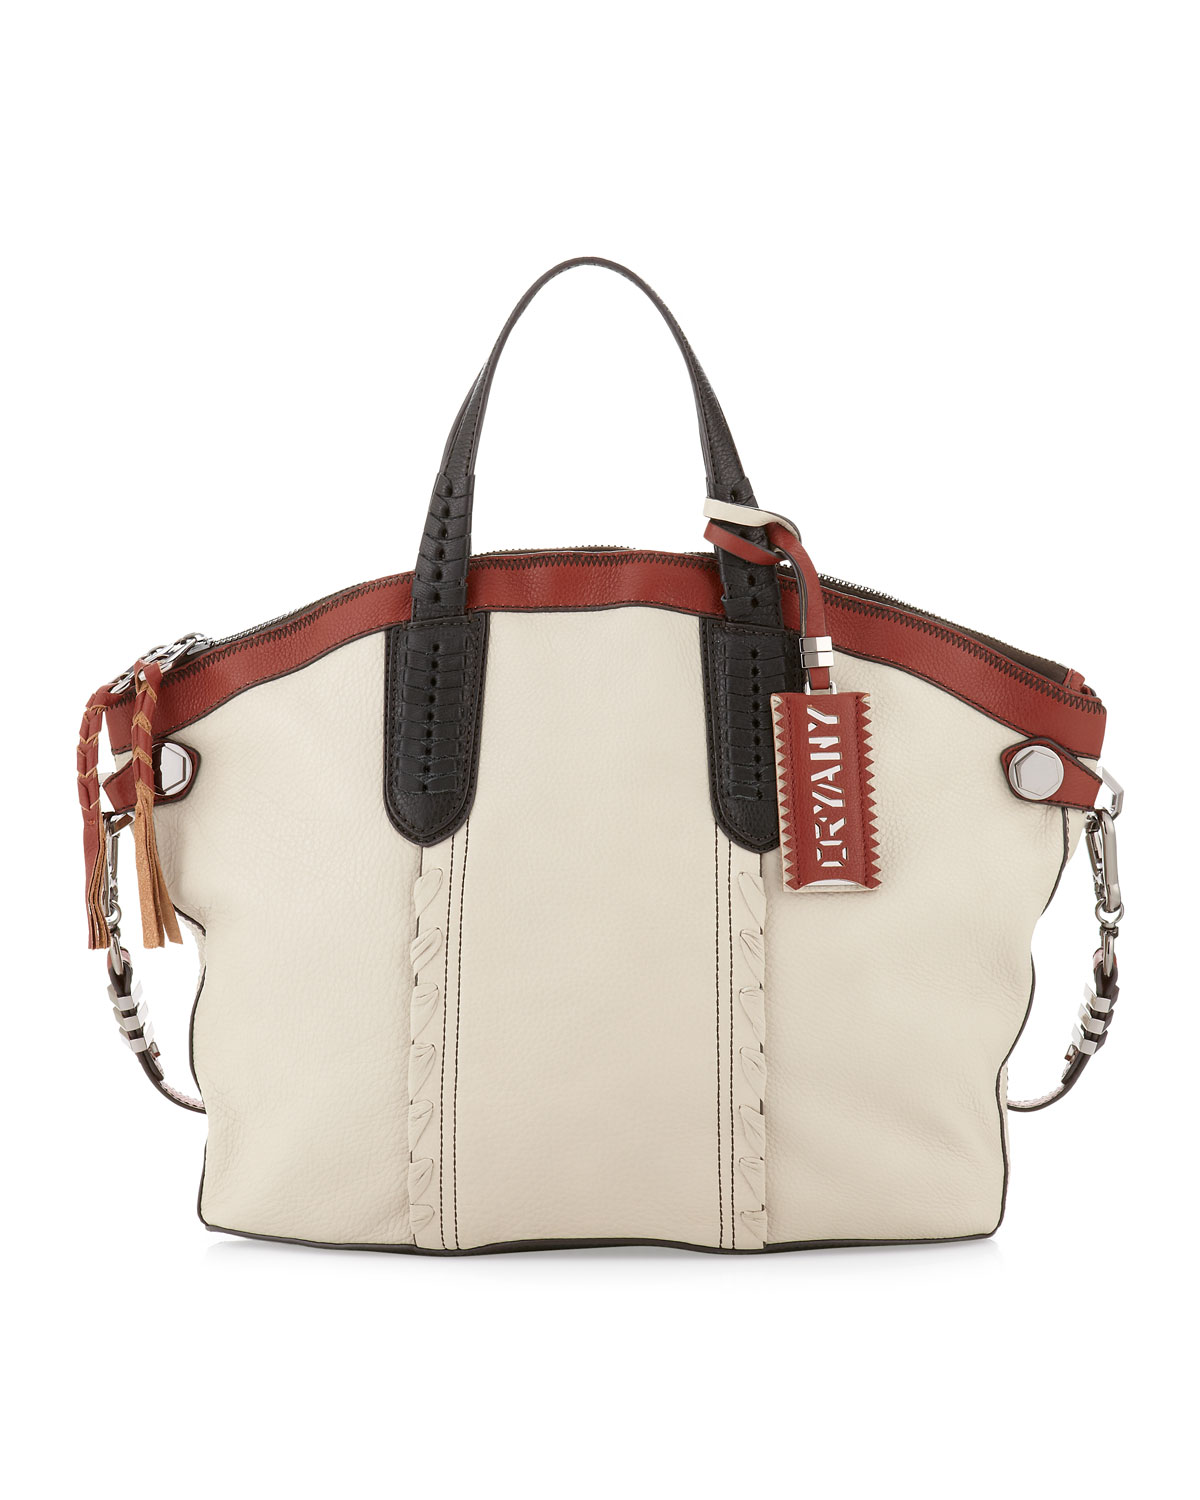 Oryany Cassie Whipstitch Convertible Tote Bag in Beige (bone) | Lyst